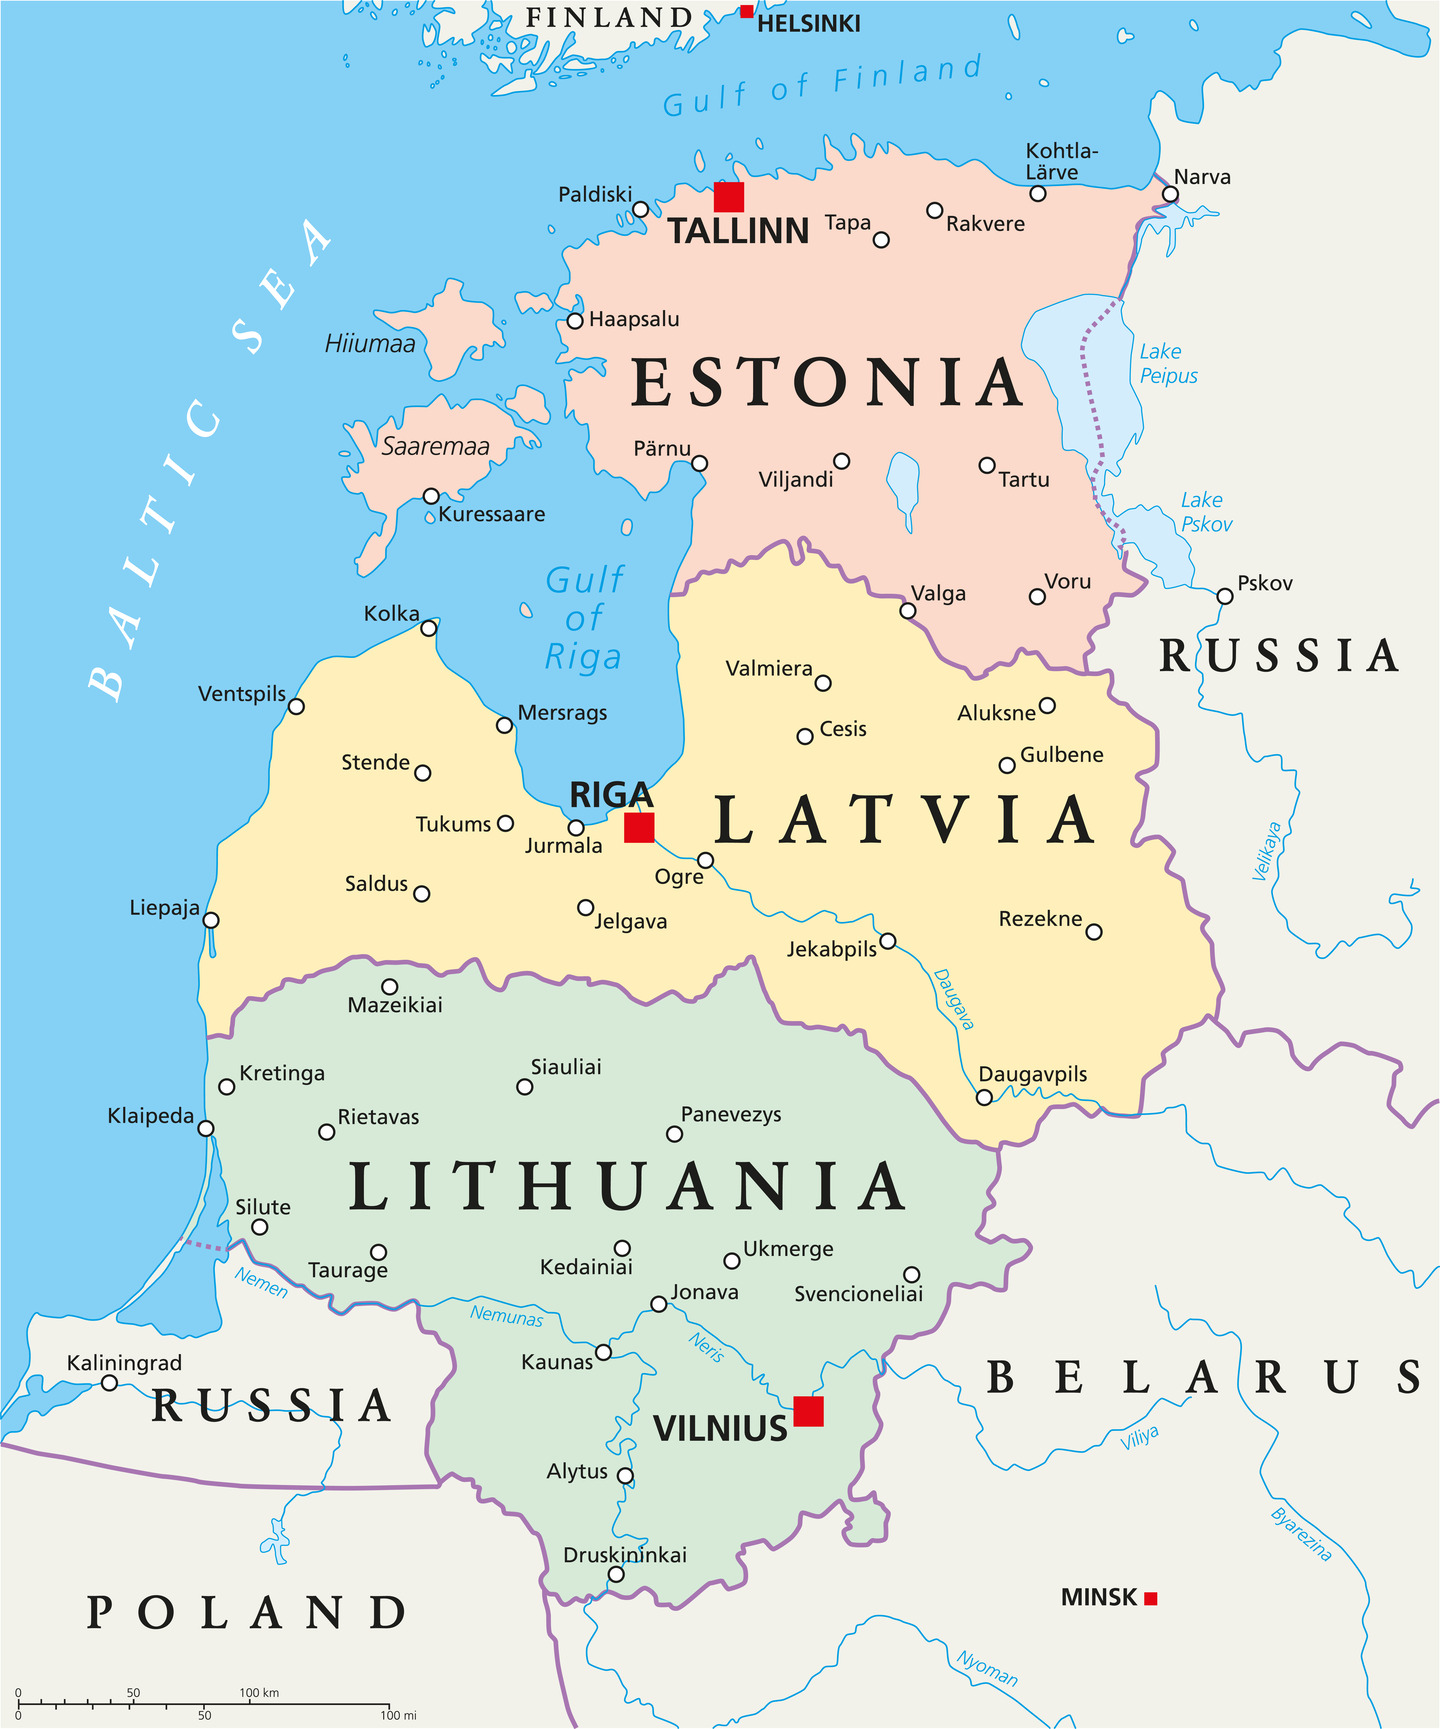 You are here: Latvia's making strides with women in tech.